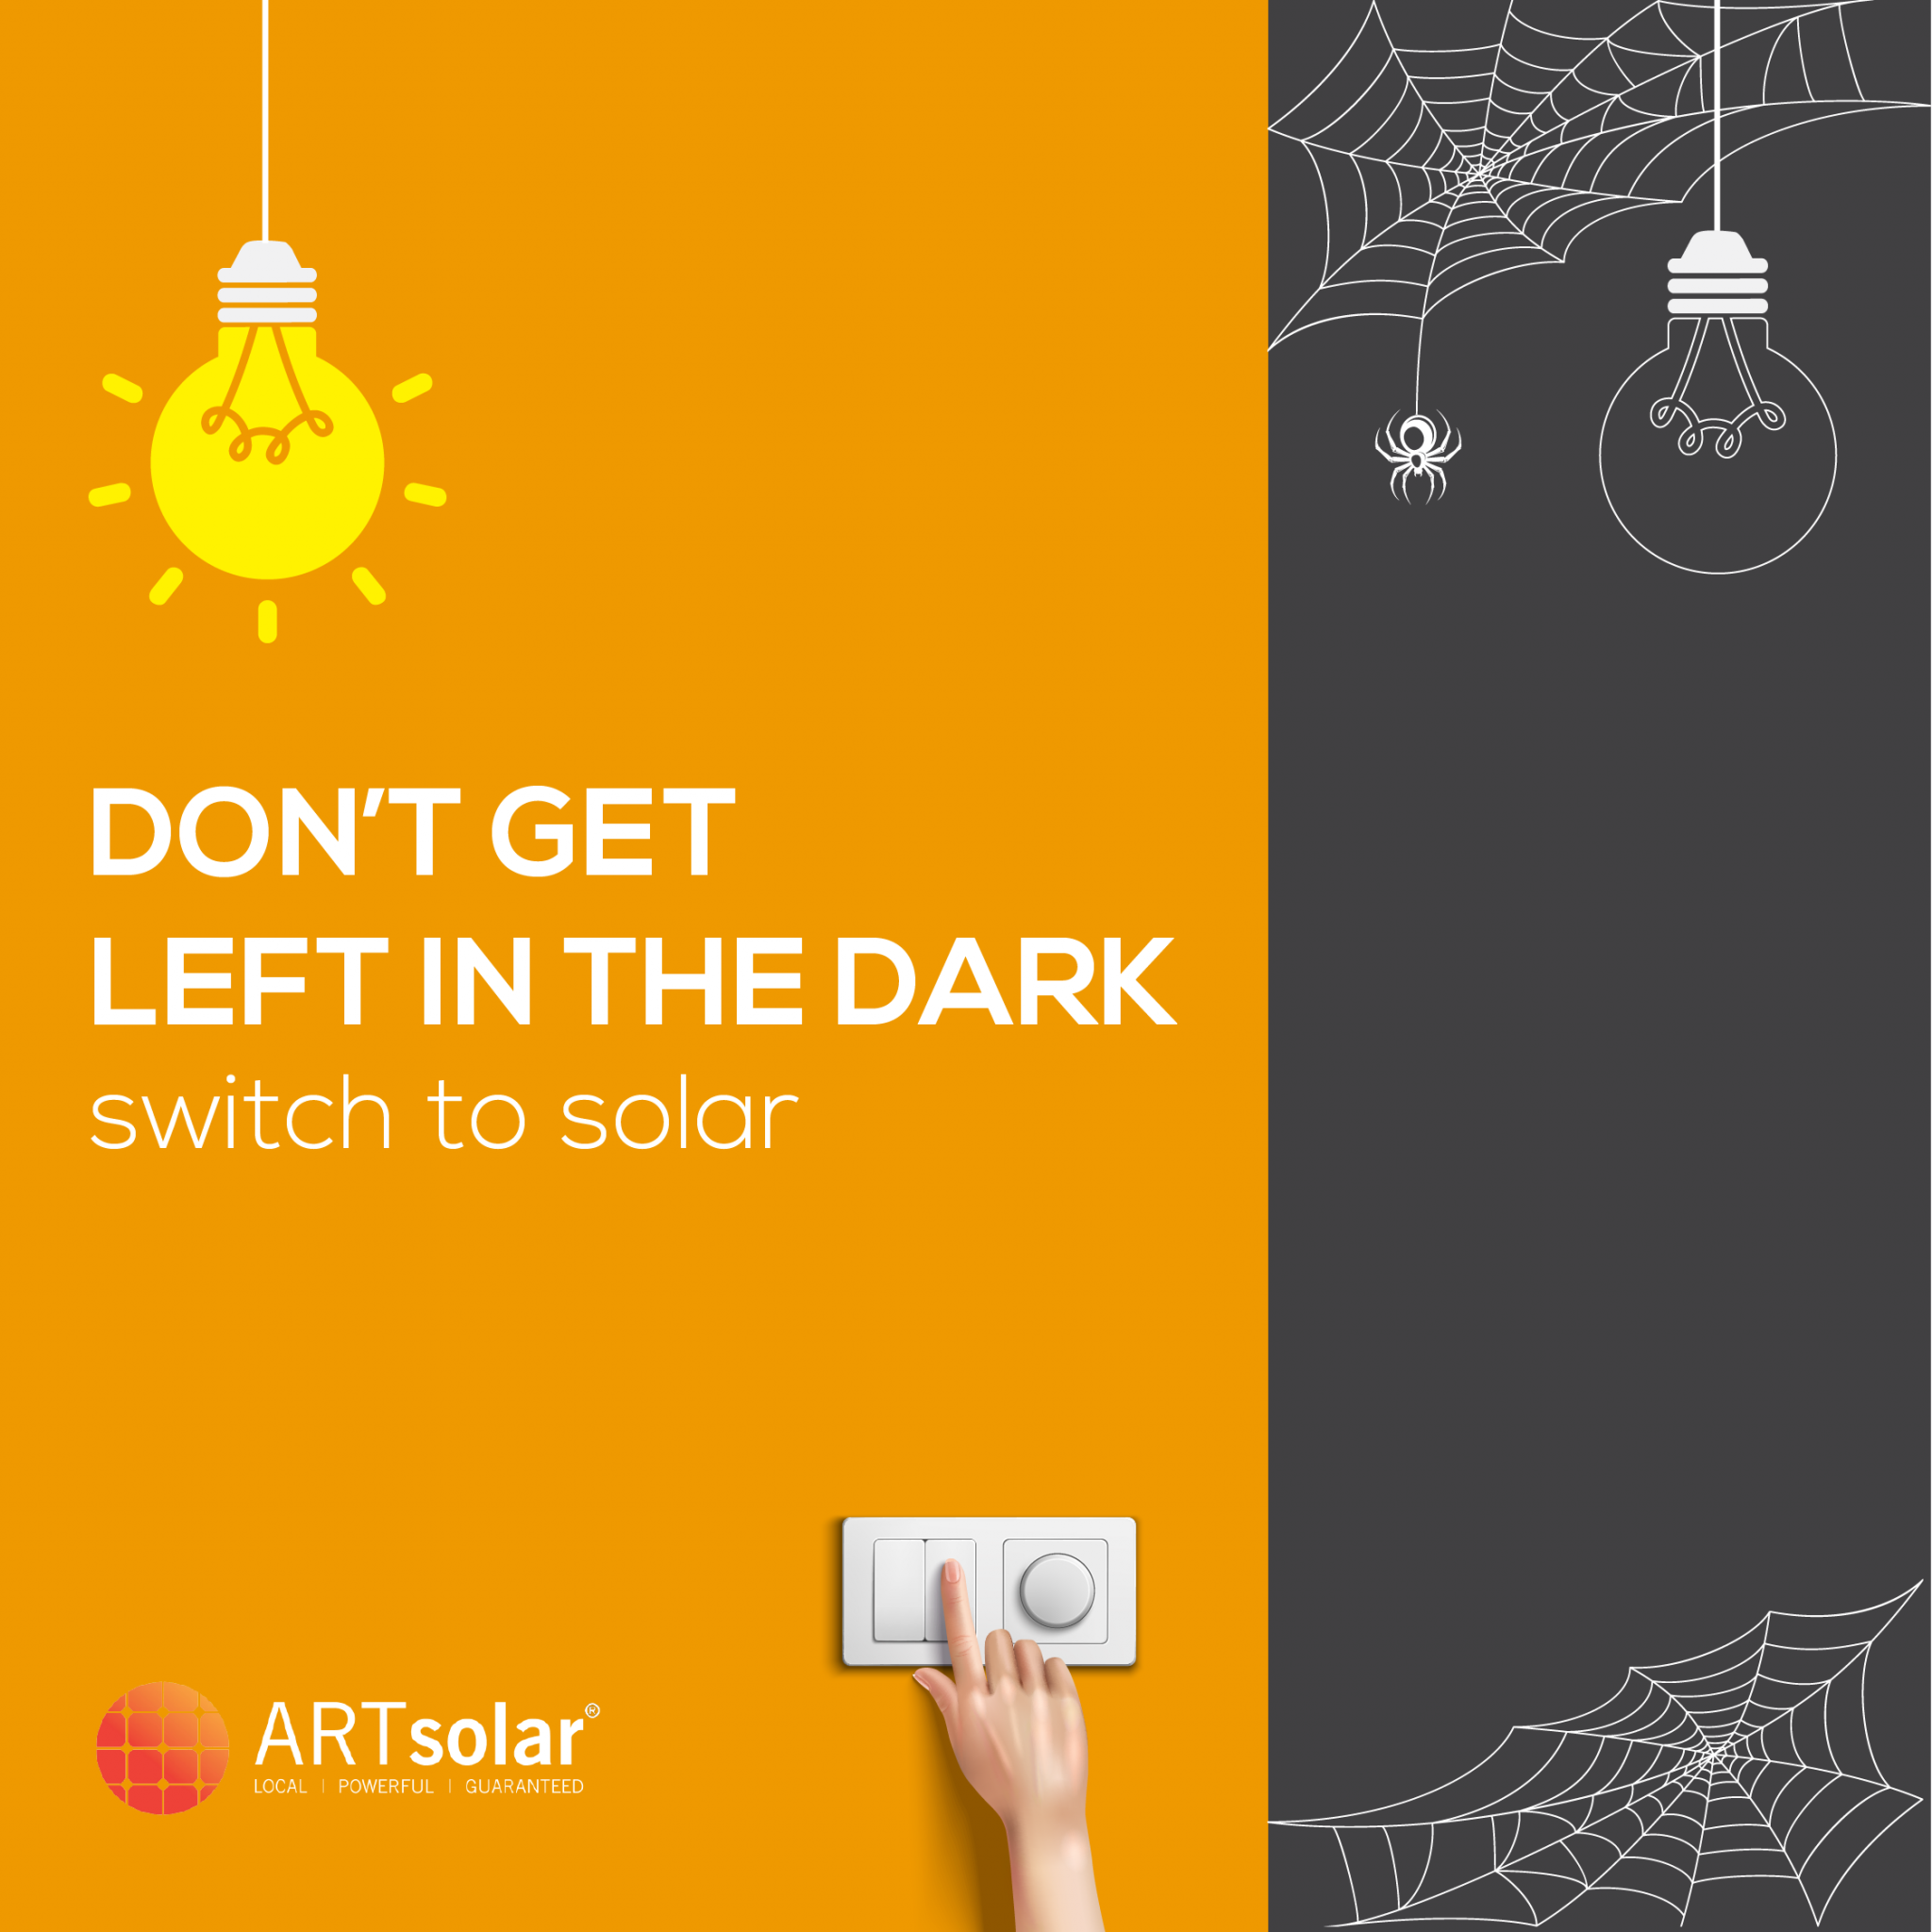 Load Shedding Leaving You In The Dark? Get A Kit.